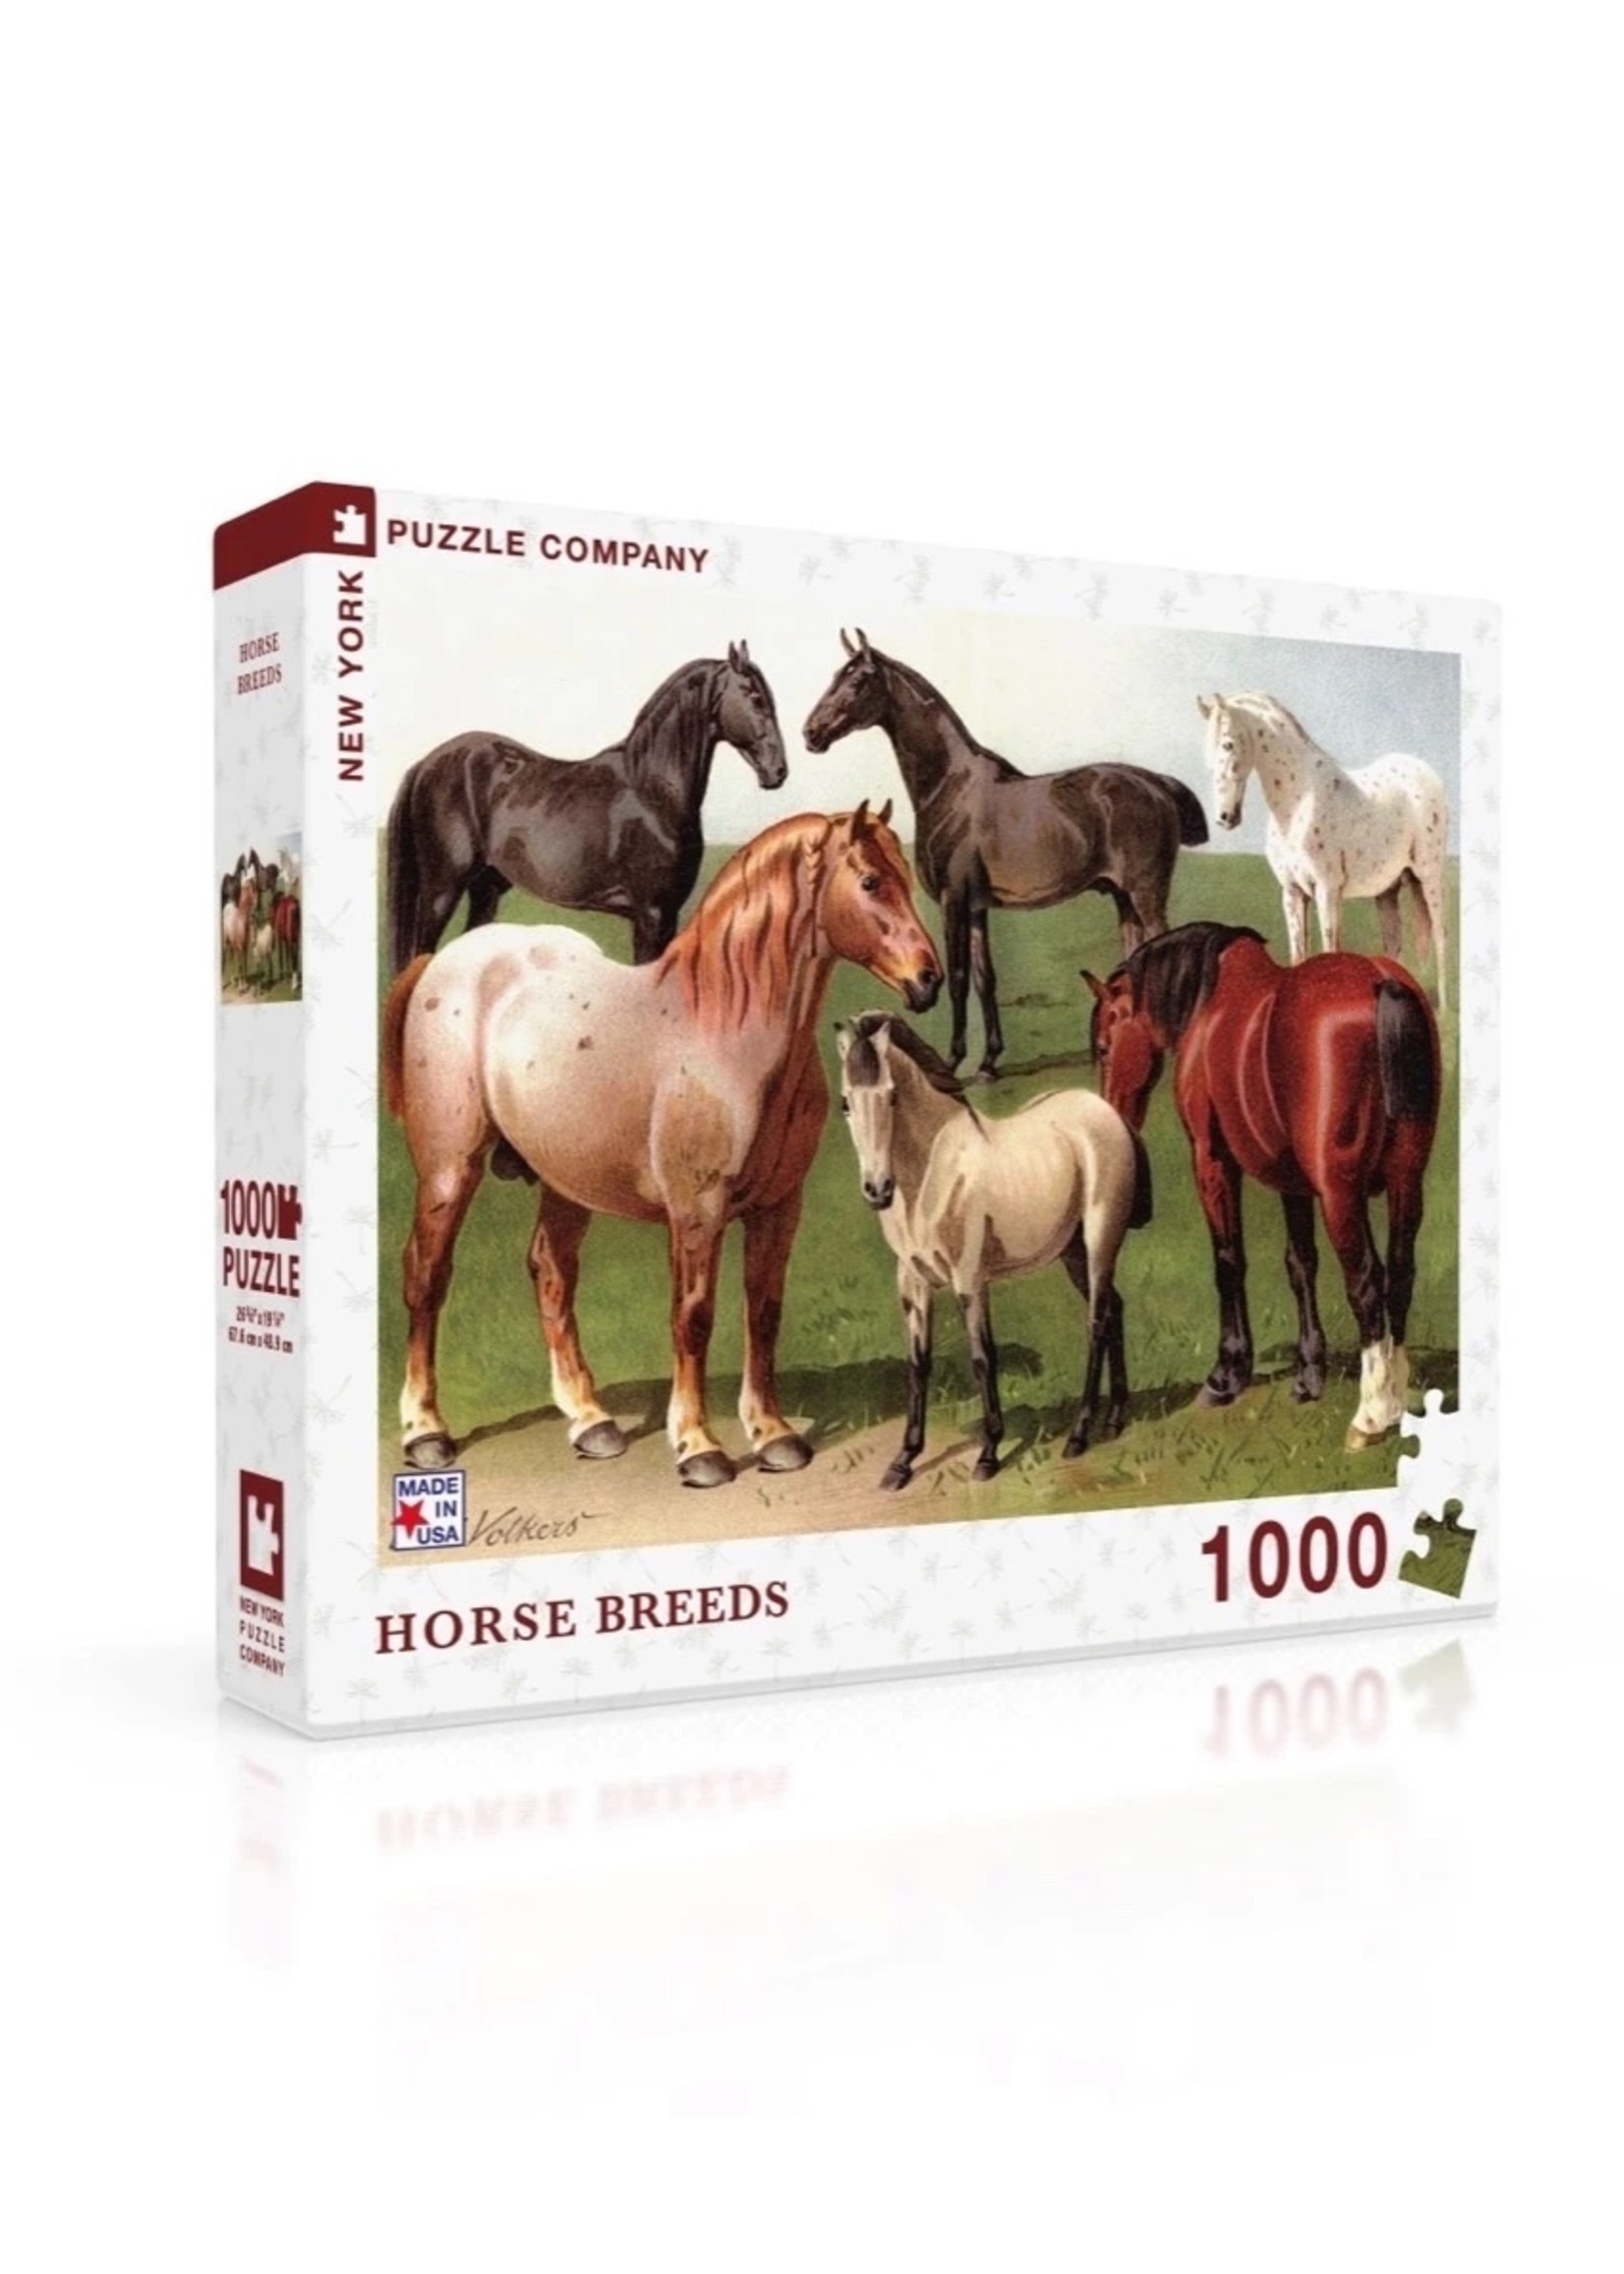 New York Puzzle Co Horse Breeds - 1000 Piece Puzzle